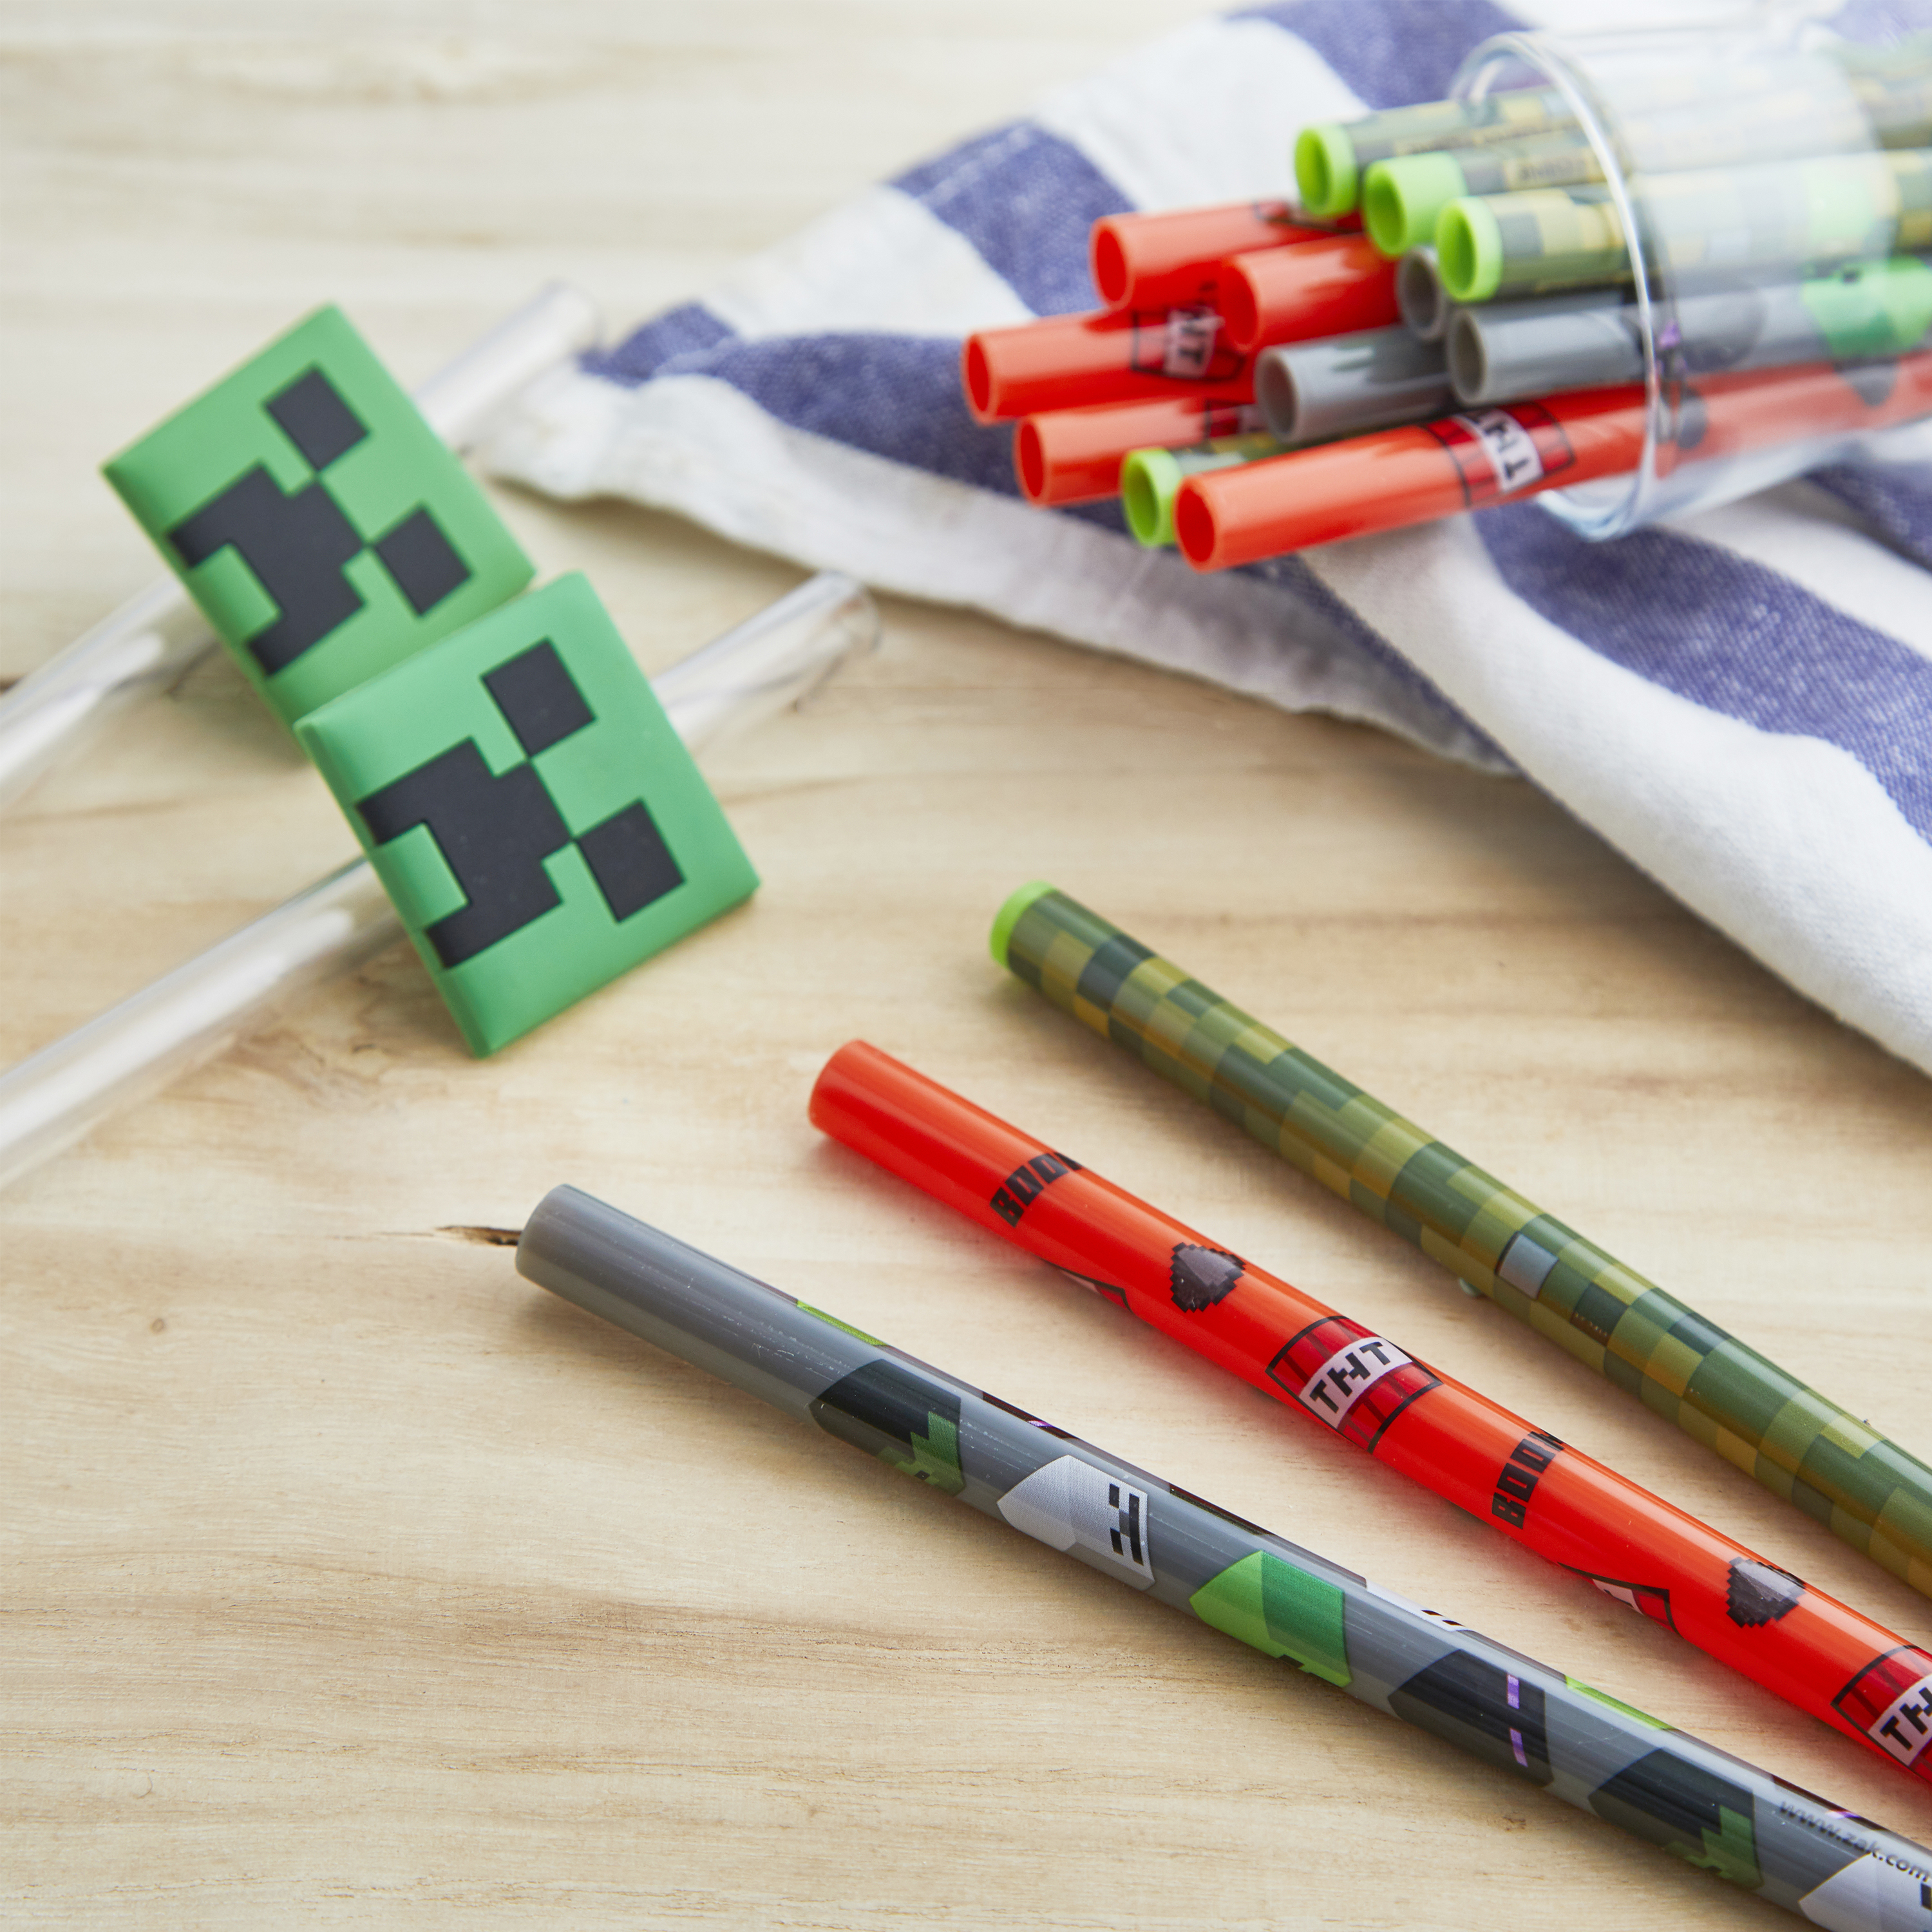 Minecraft Reusable Straws and Medallions, Creepers, 40-piece set slideshow image 2